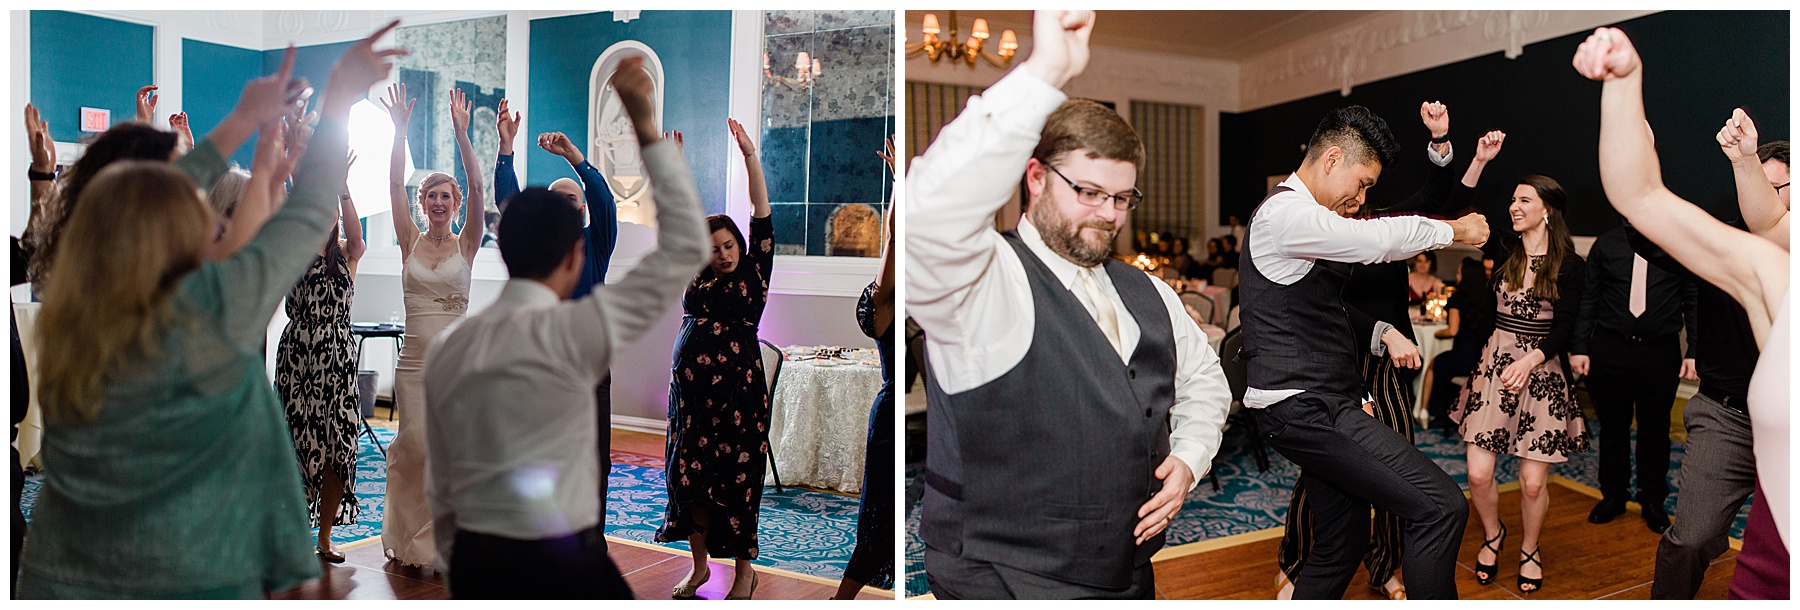 dancing at the reception of vintage sentinel hotel wedding in downtown portland oregon